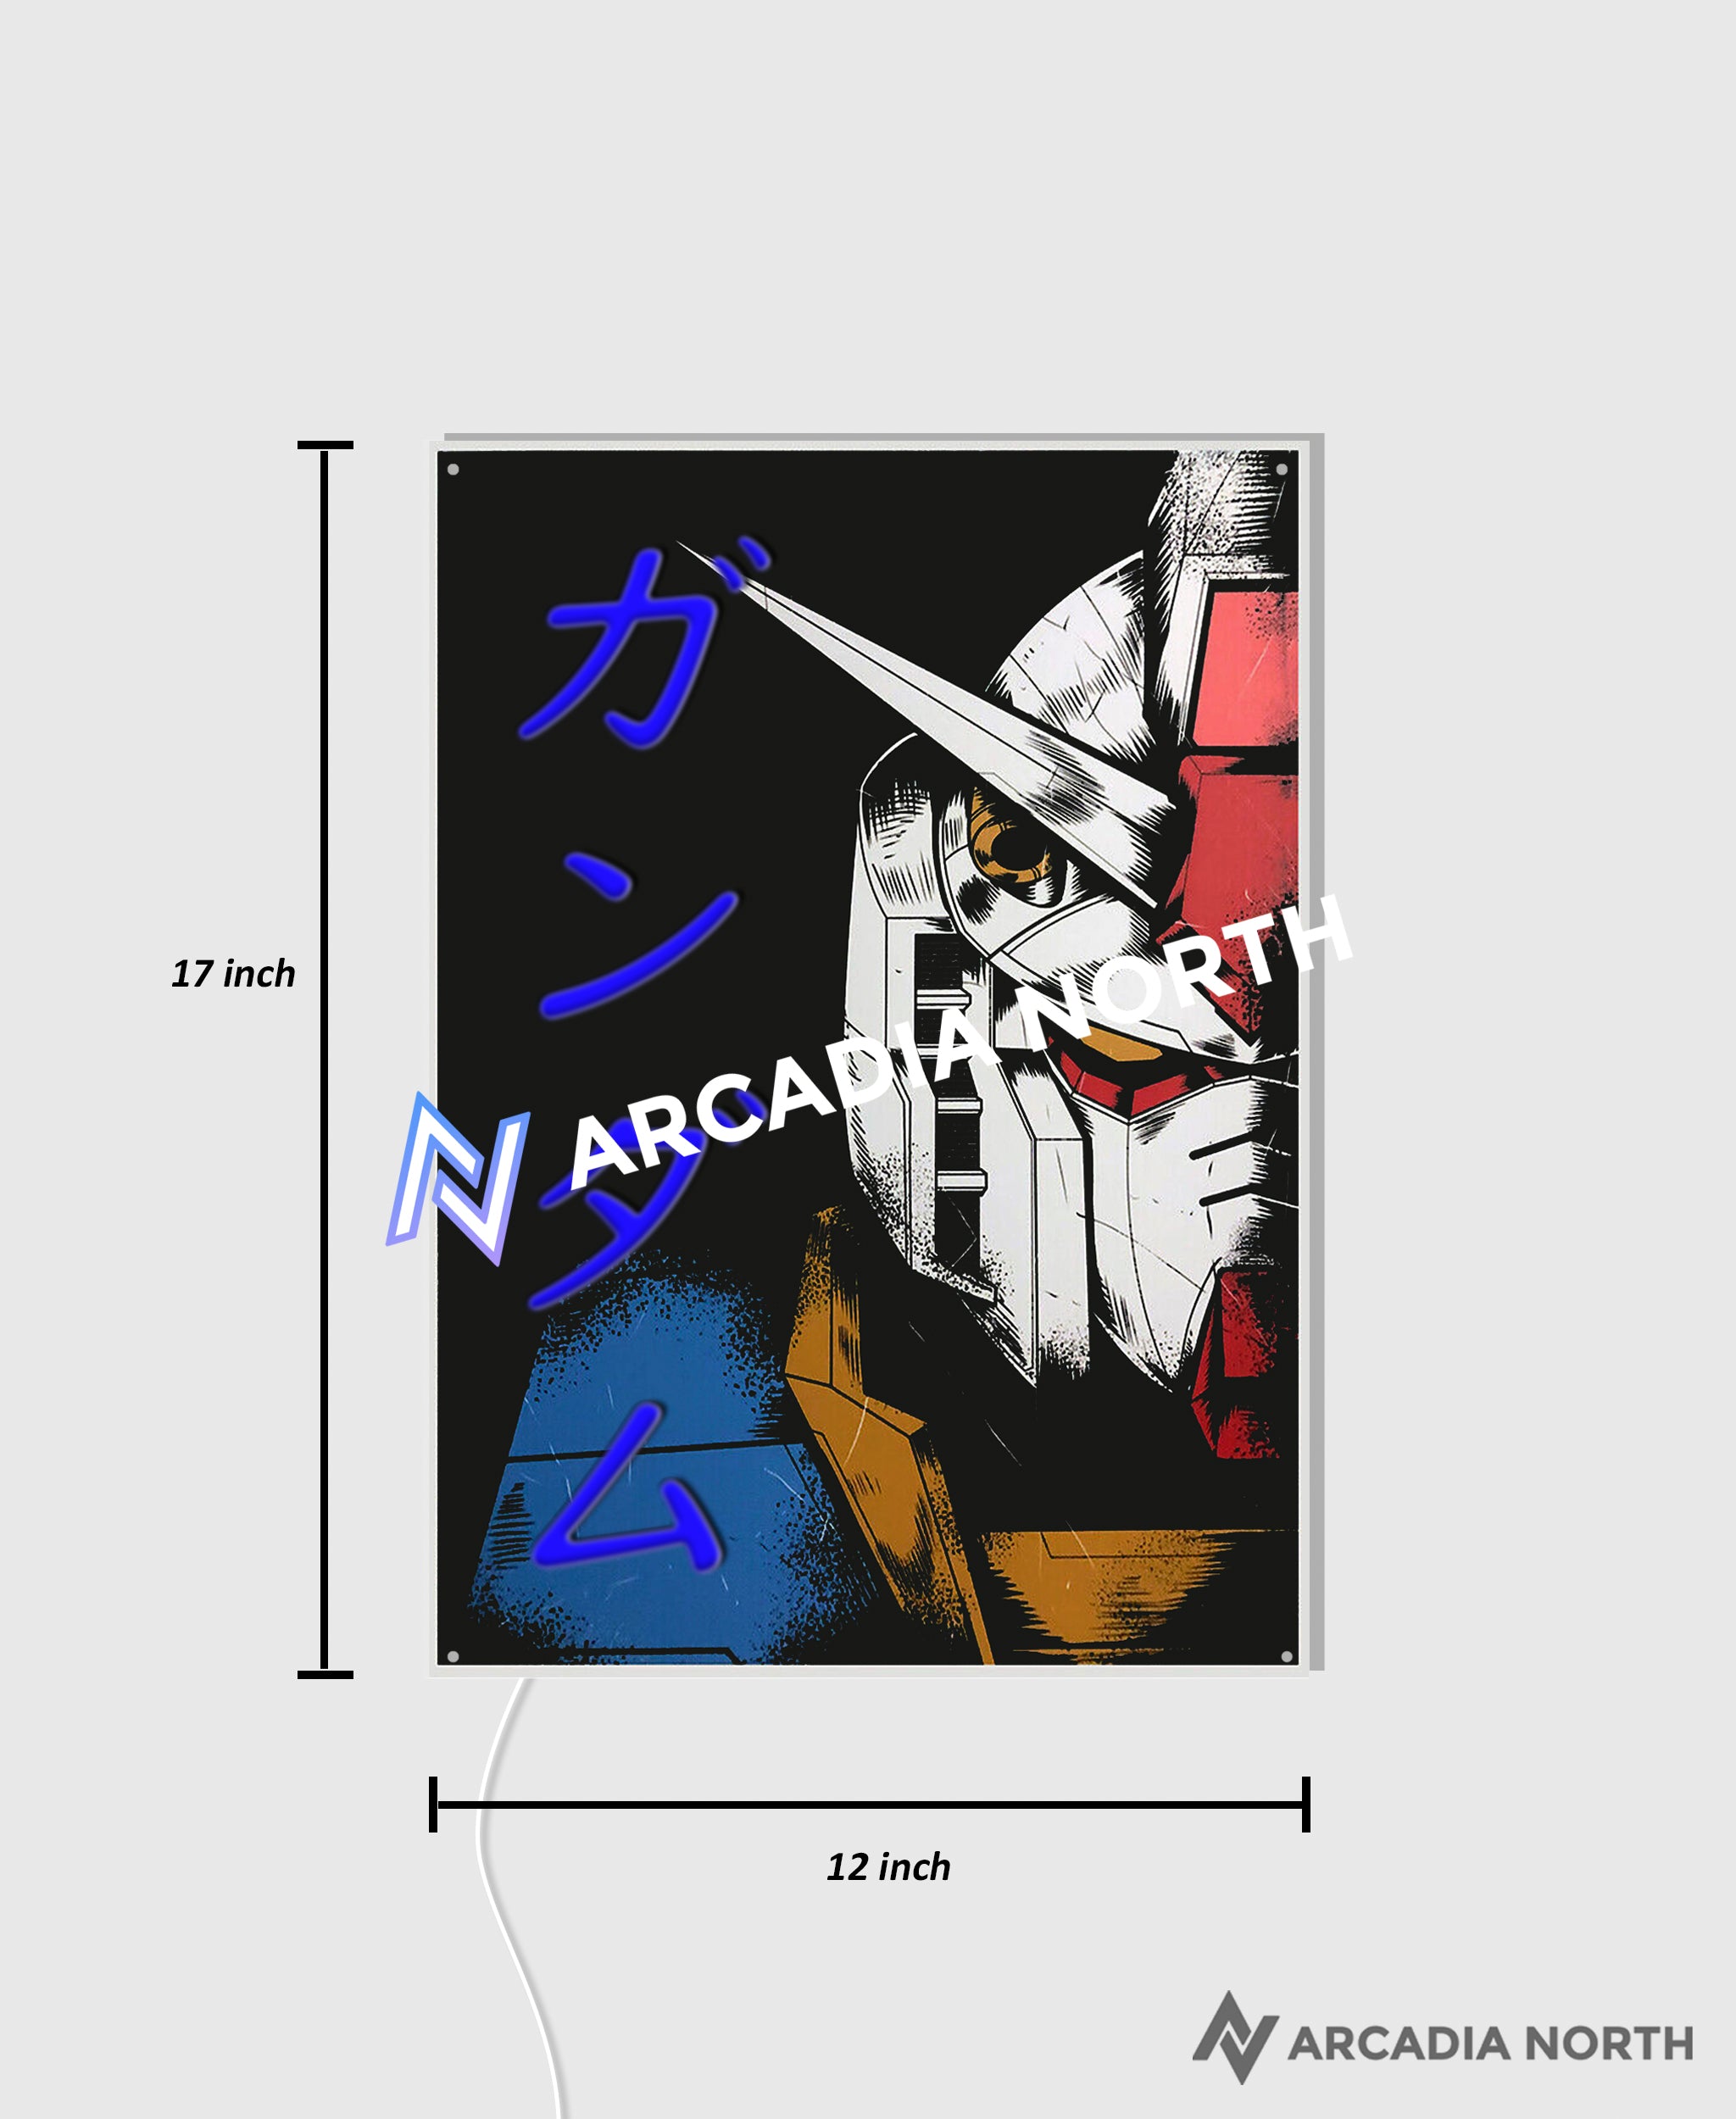 Arcadia North AURALIGHT - an acrylic LED Poster featuring the anime Mobile Suit Gundam with the RX-78-2 Gundam. Gundam is written in Japanese Katakana and illuminated by glowing neon LED lights. UV-printed on acrylic.